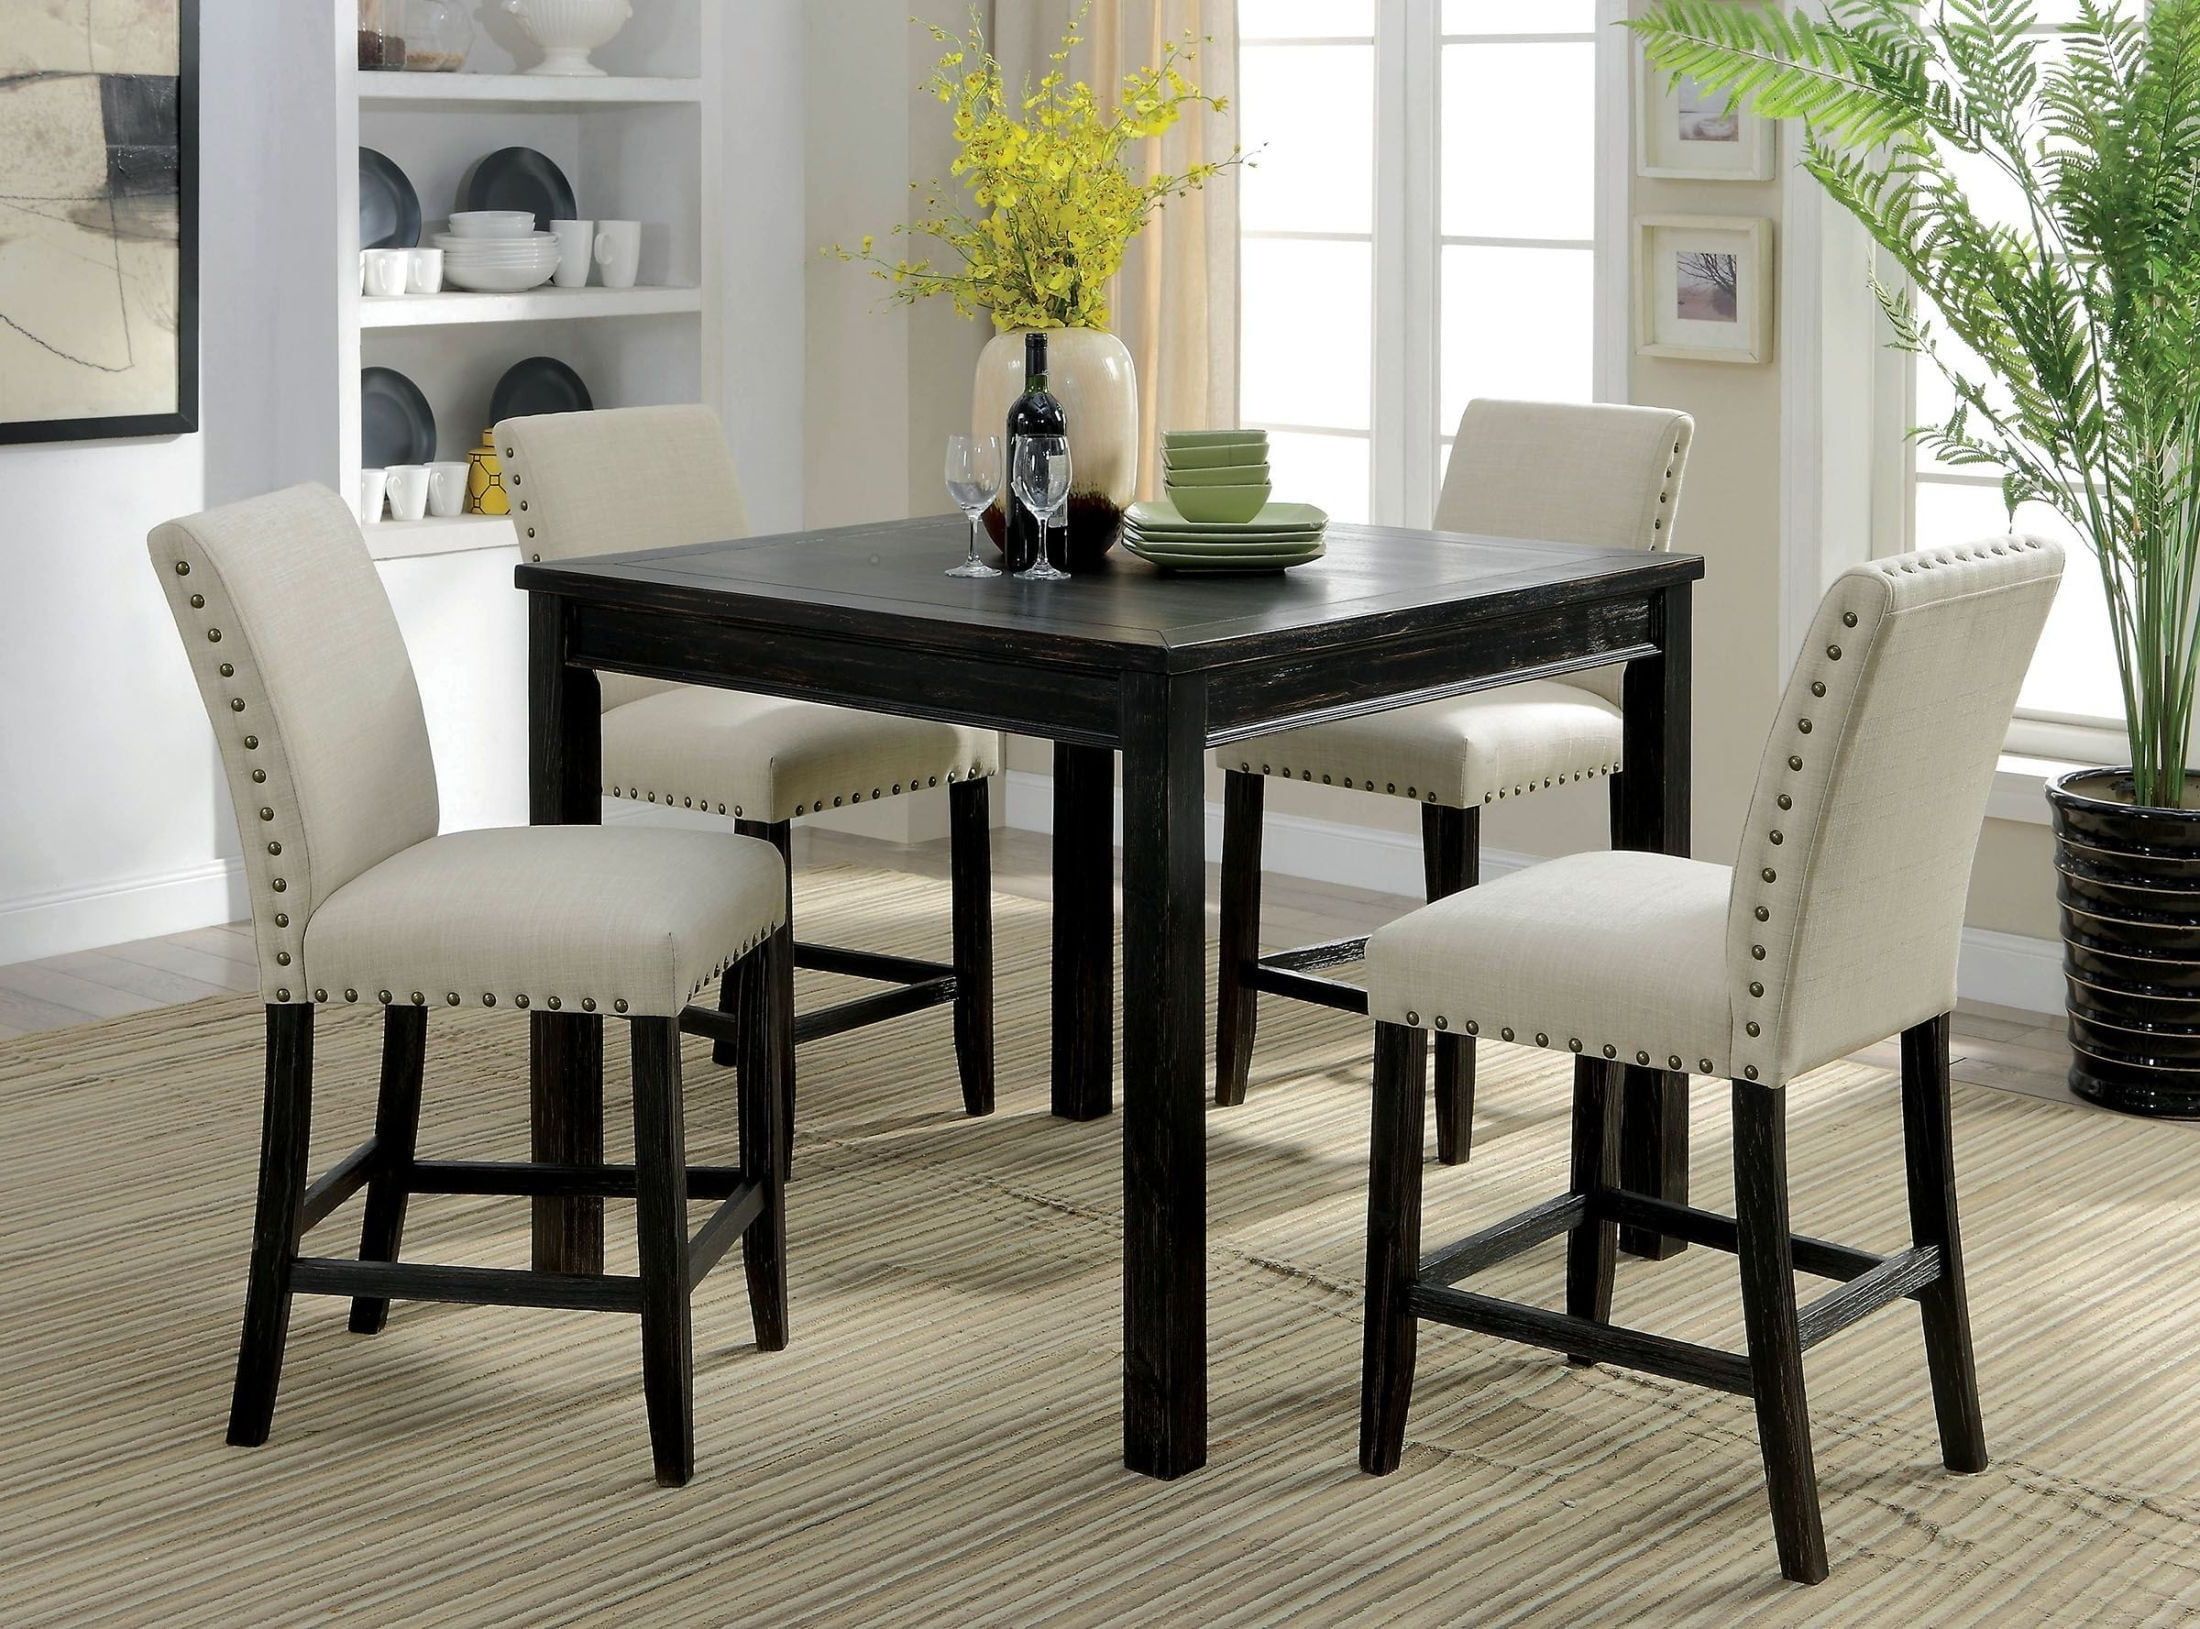 Hearne Counter Height Dining Tables Inside Recent Kristie Antique Black Counter Height Dining Table Set From (View 16 of 20)